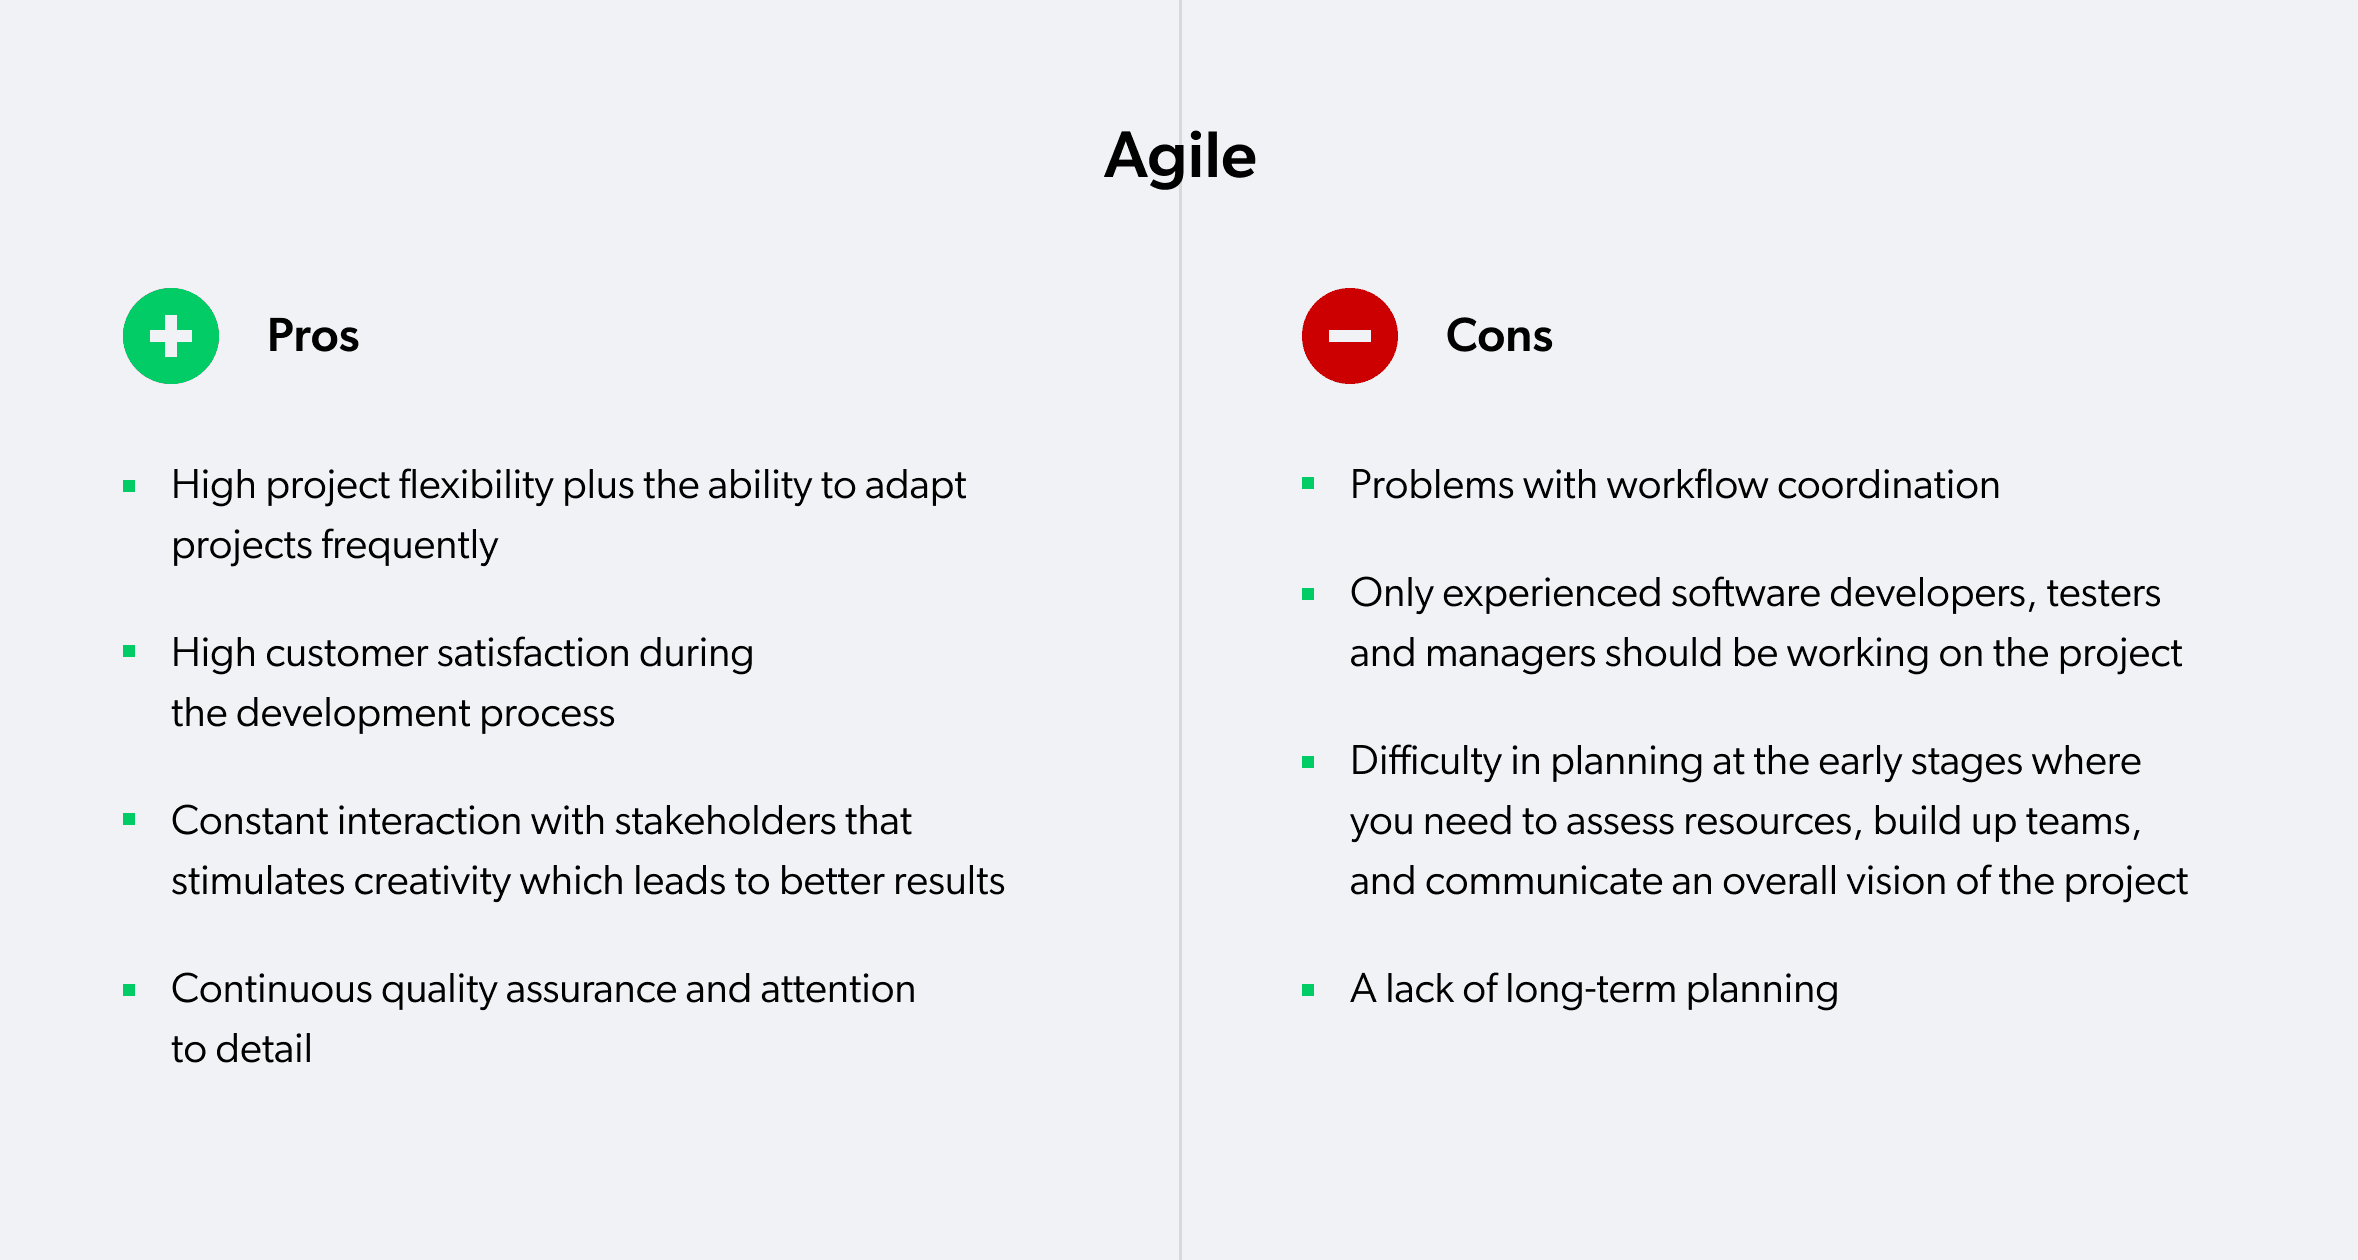 agile pros and cons